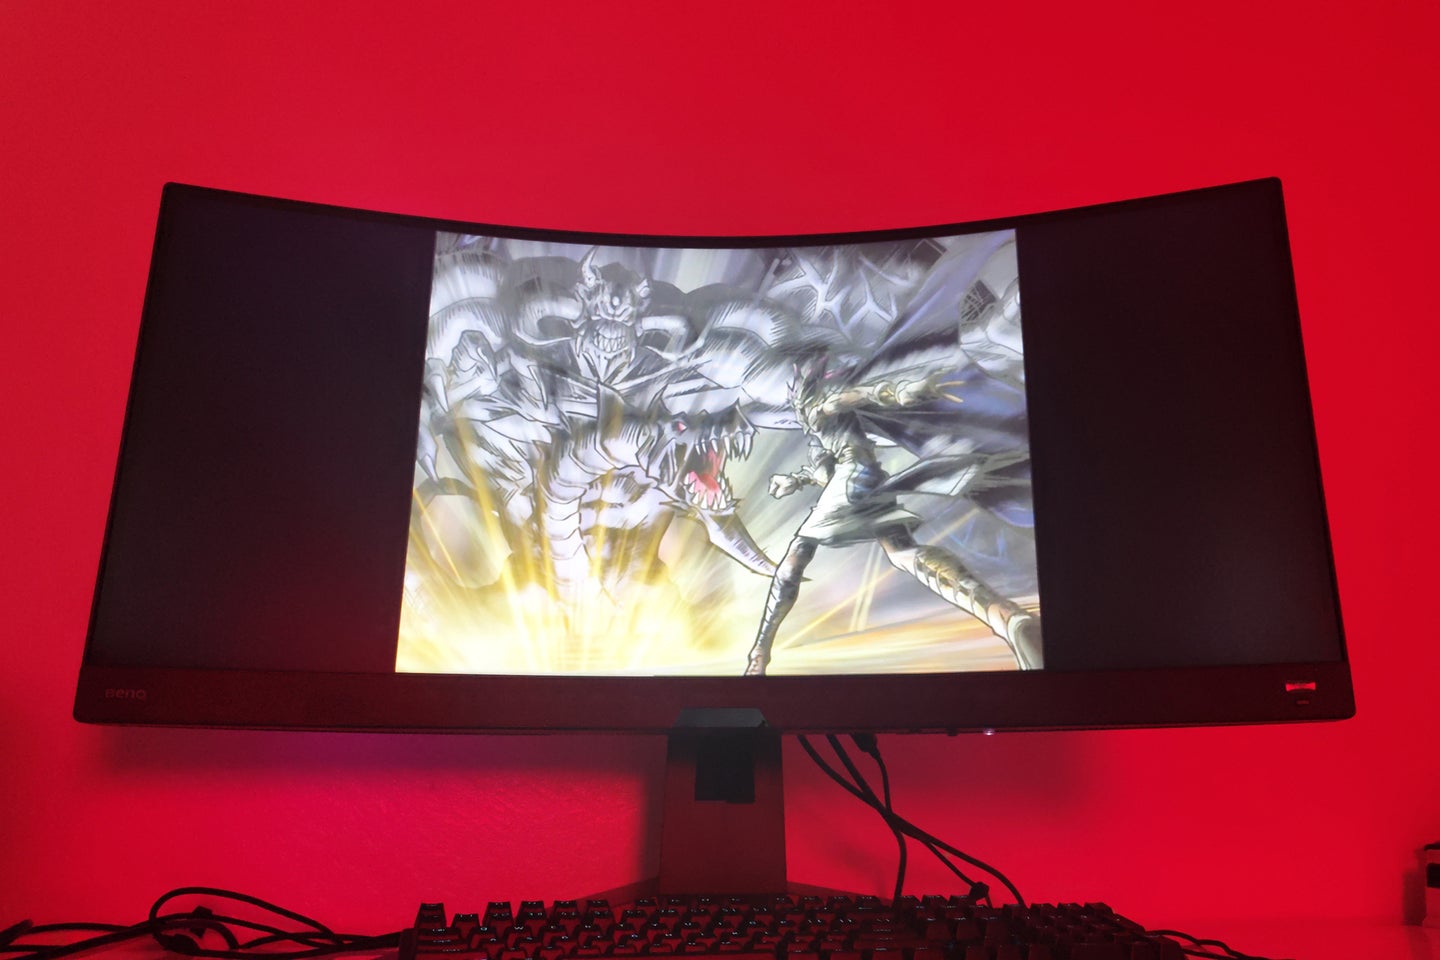 scene from an anime on a curved monitor against a red wall